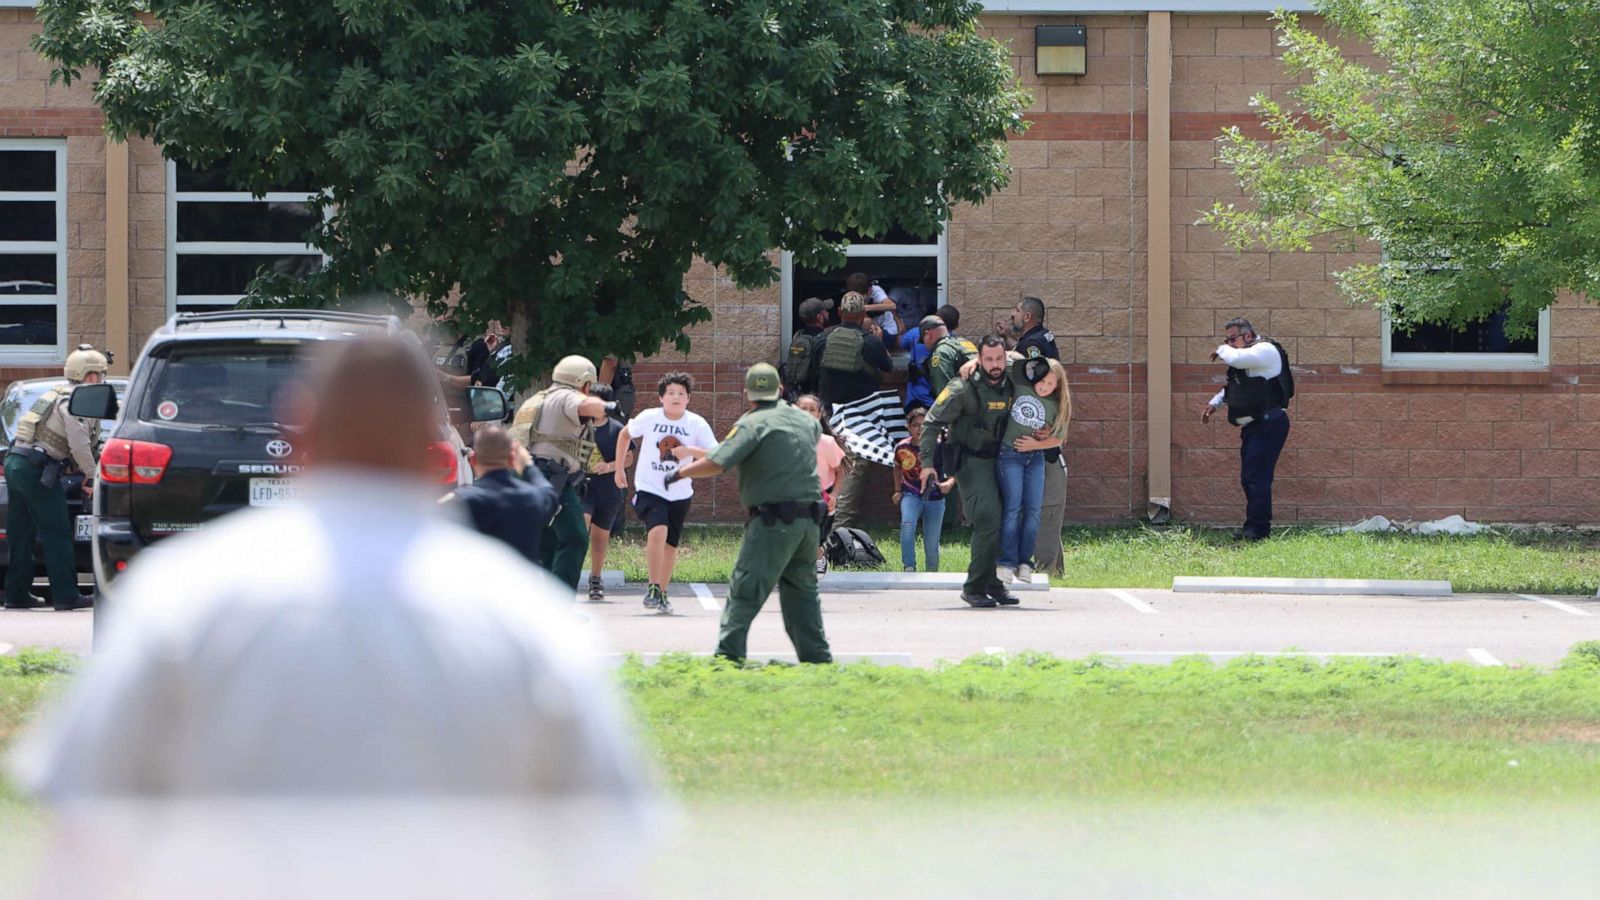 Timeline: How the shooting at a Texas elementary school unfolded - ABC News